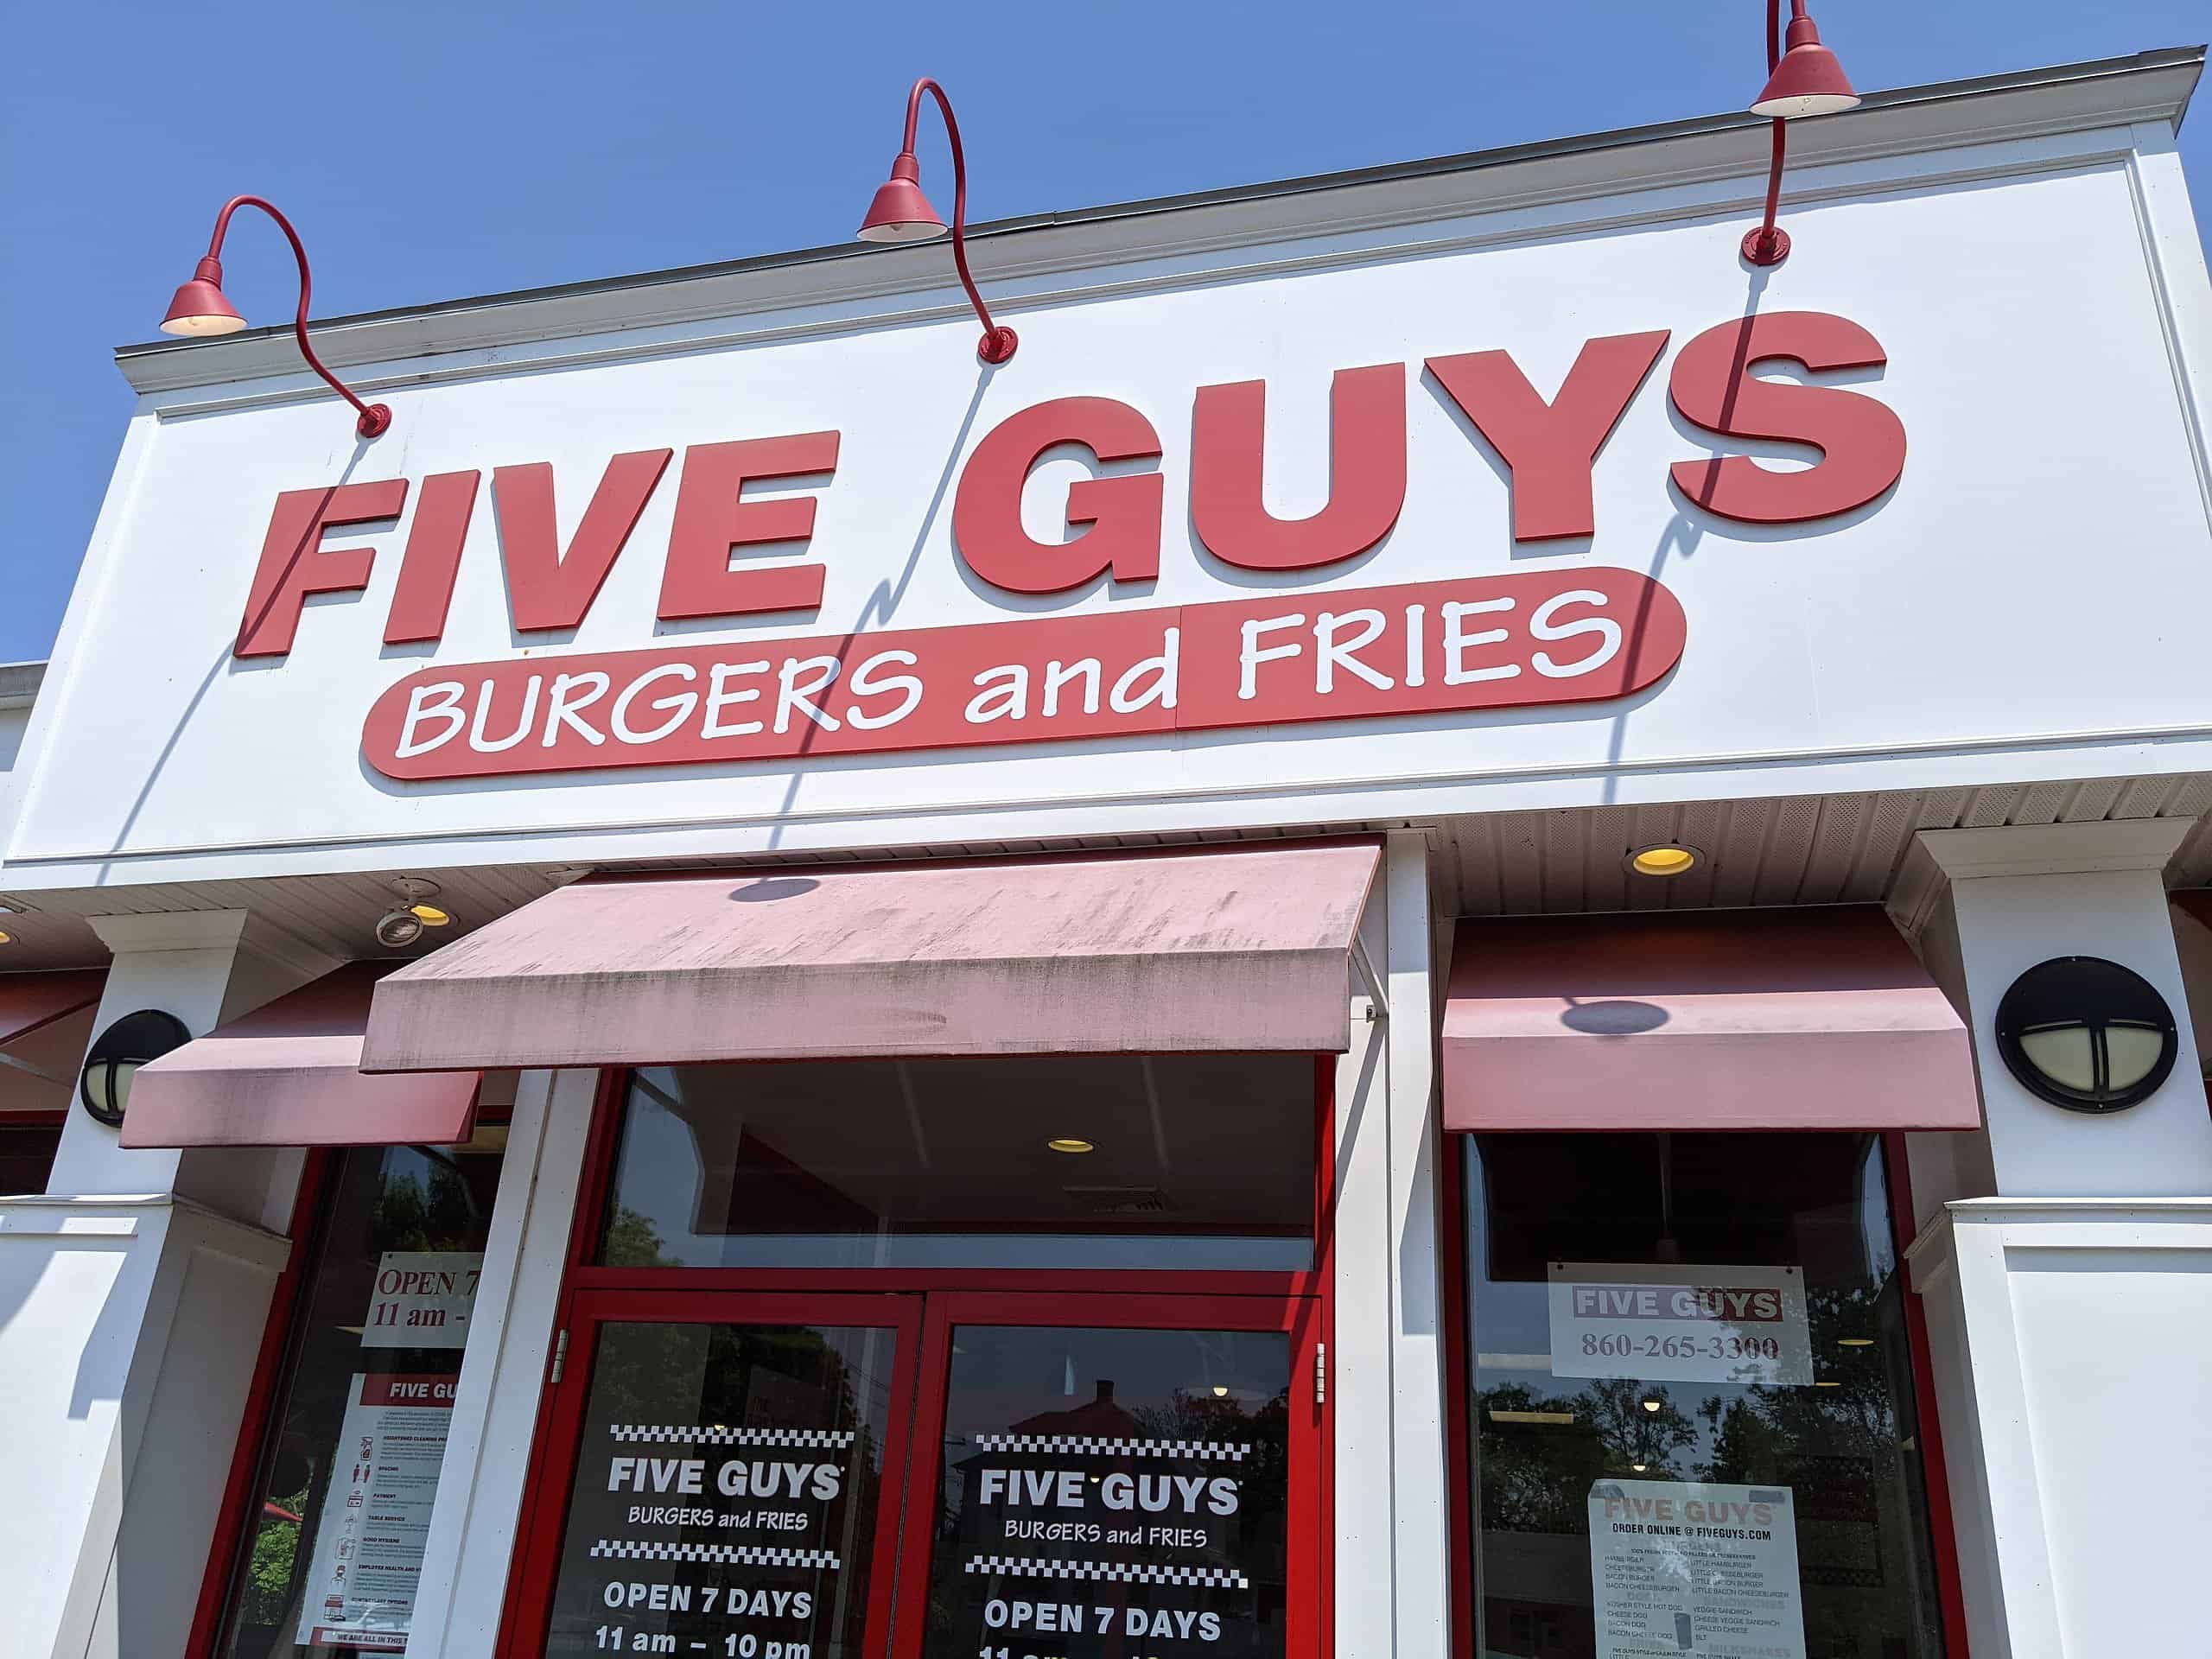 Five Guys by JJBers from Willimantic, Connecticut, USA